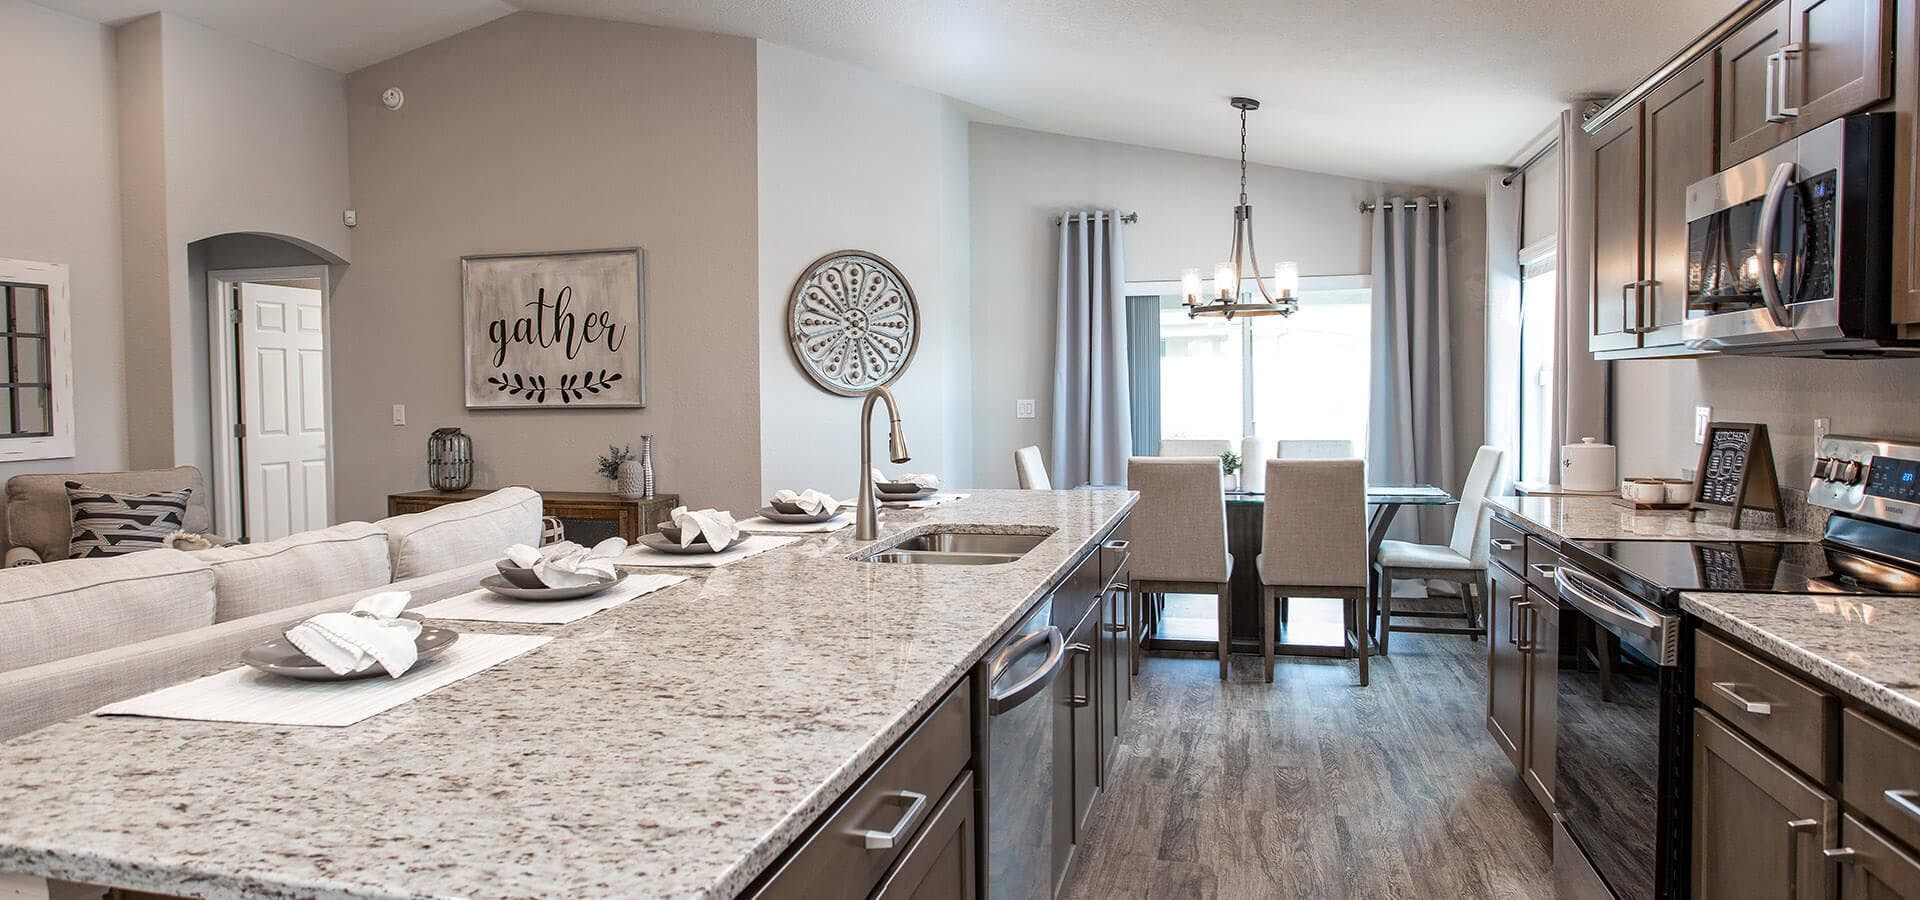 Kitchen and elegant dining area of the Parker new home floorplan